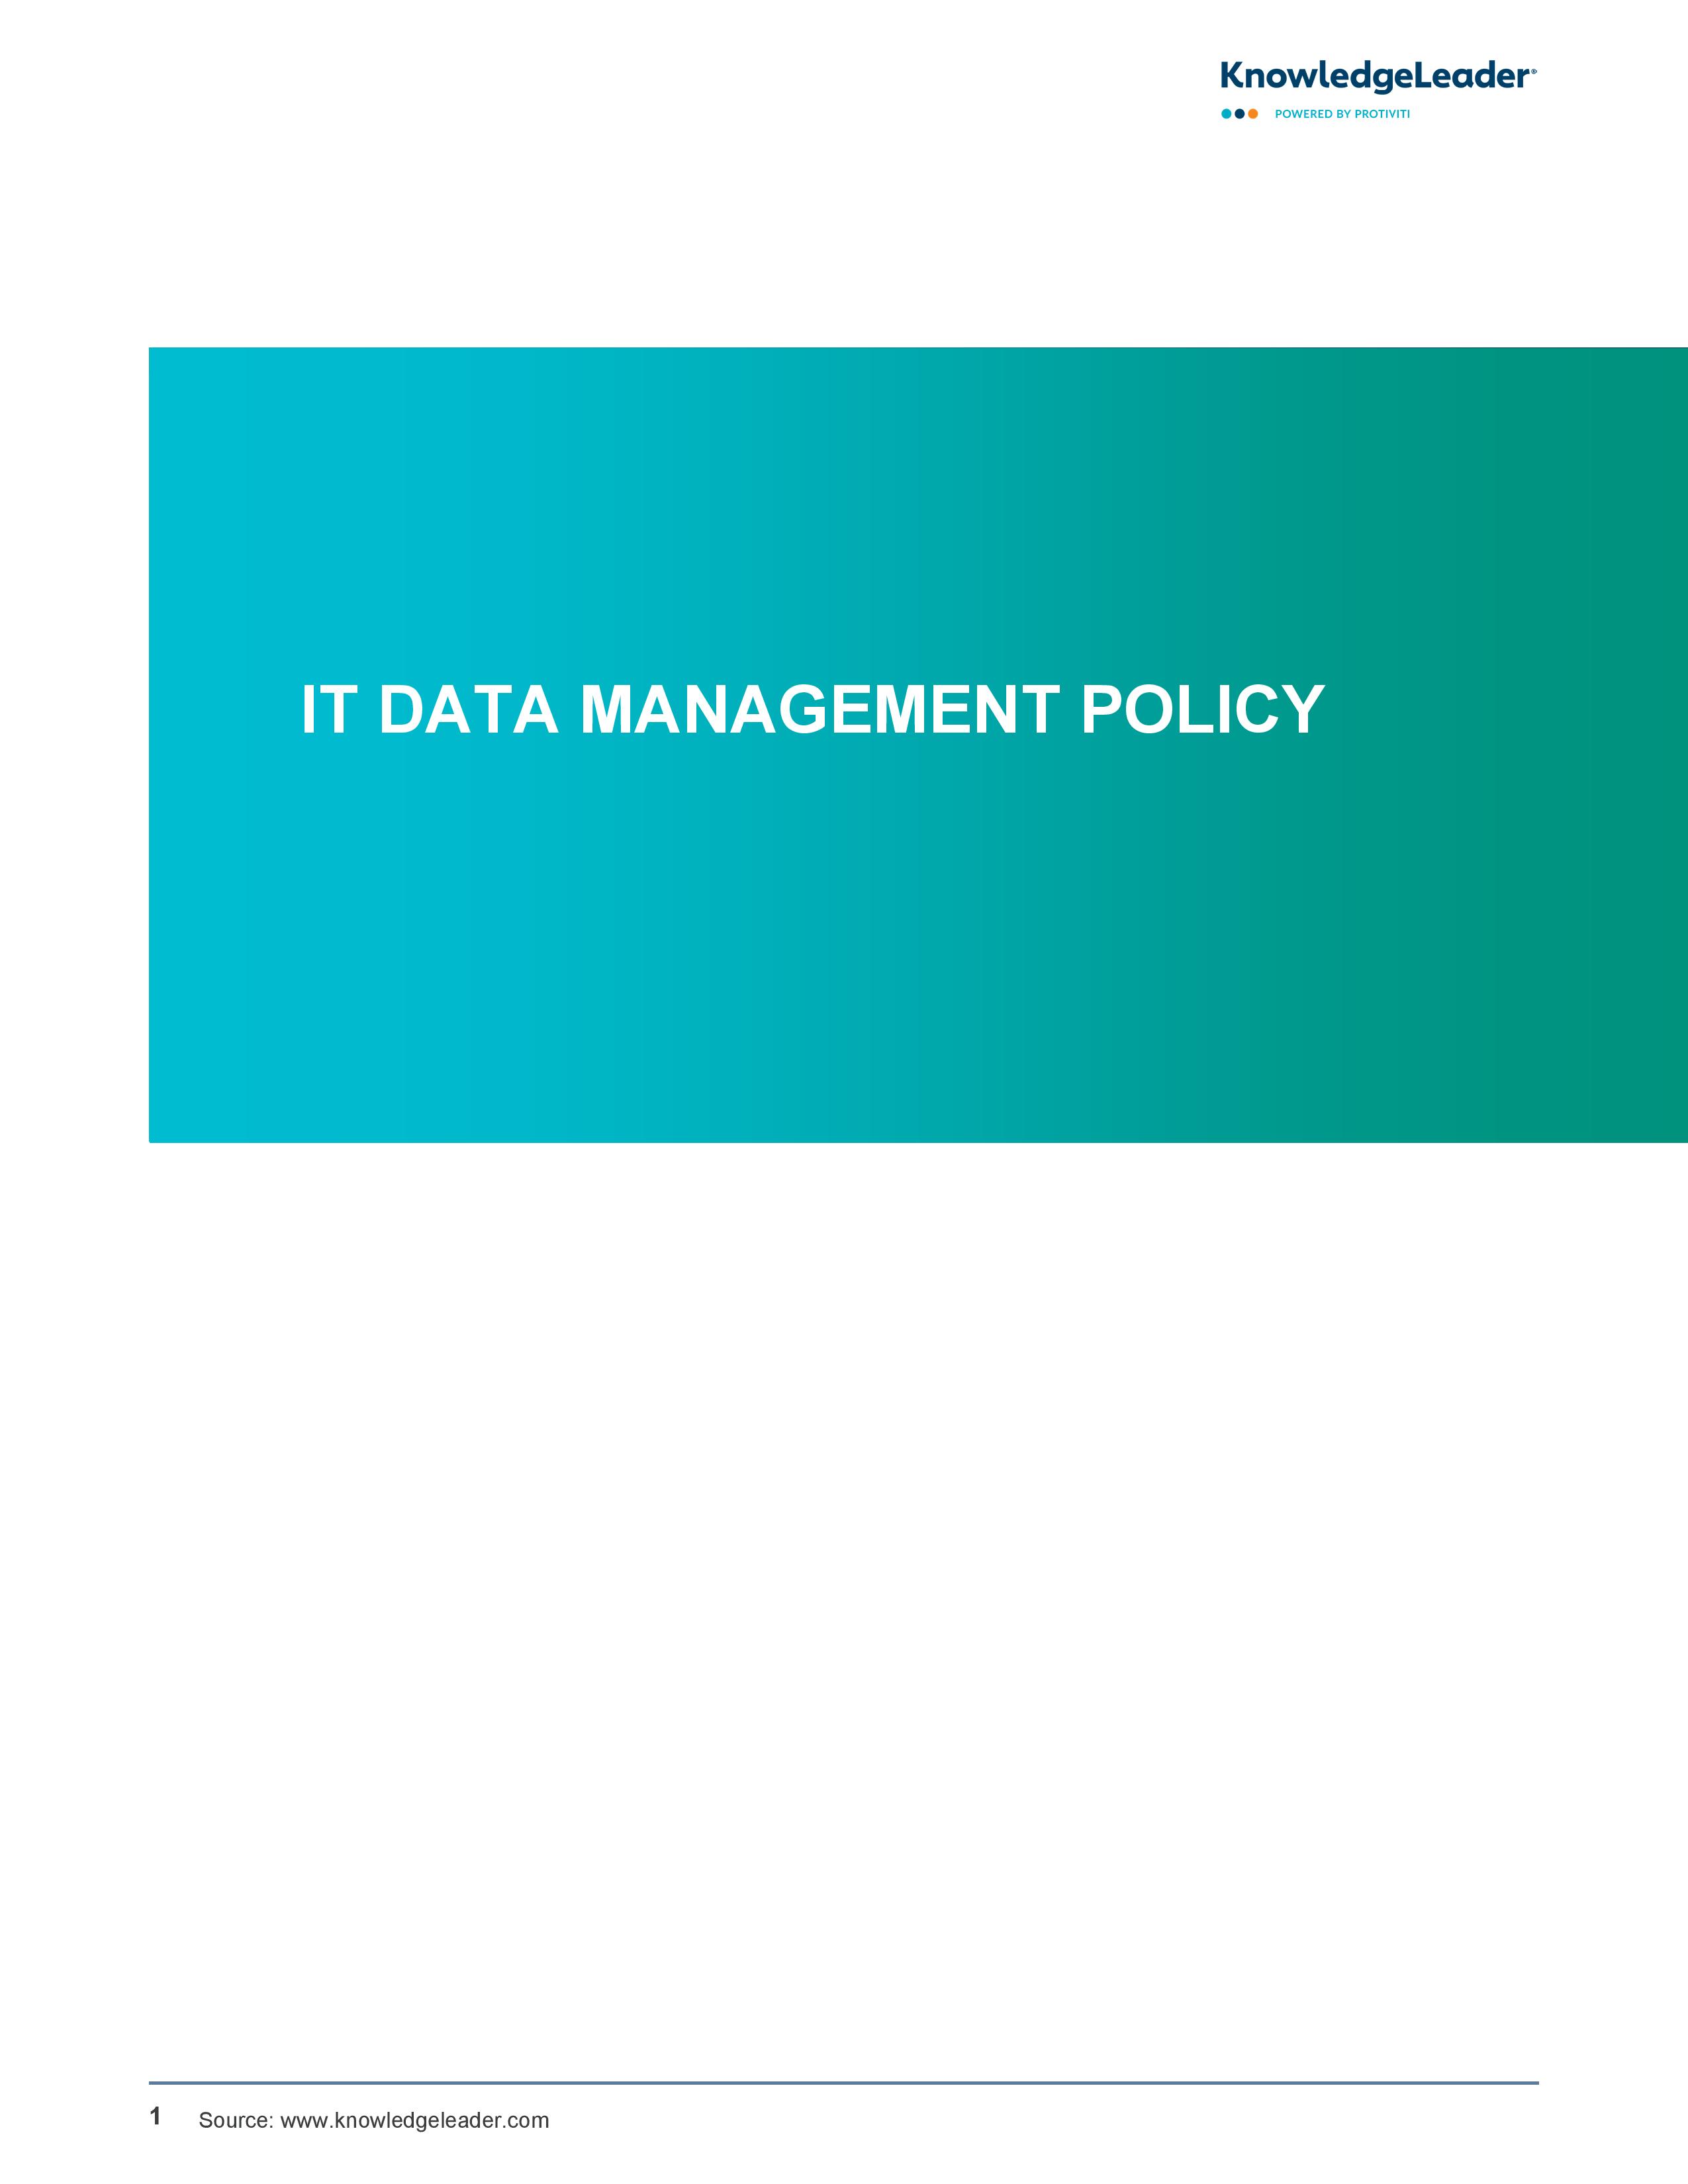 screenshot of the first page of IT Data Management Policy